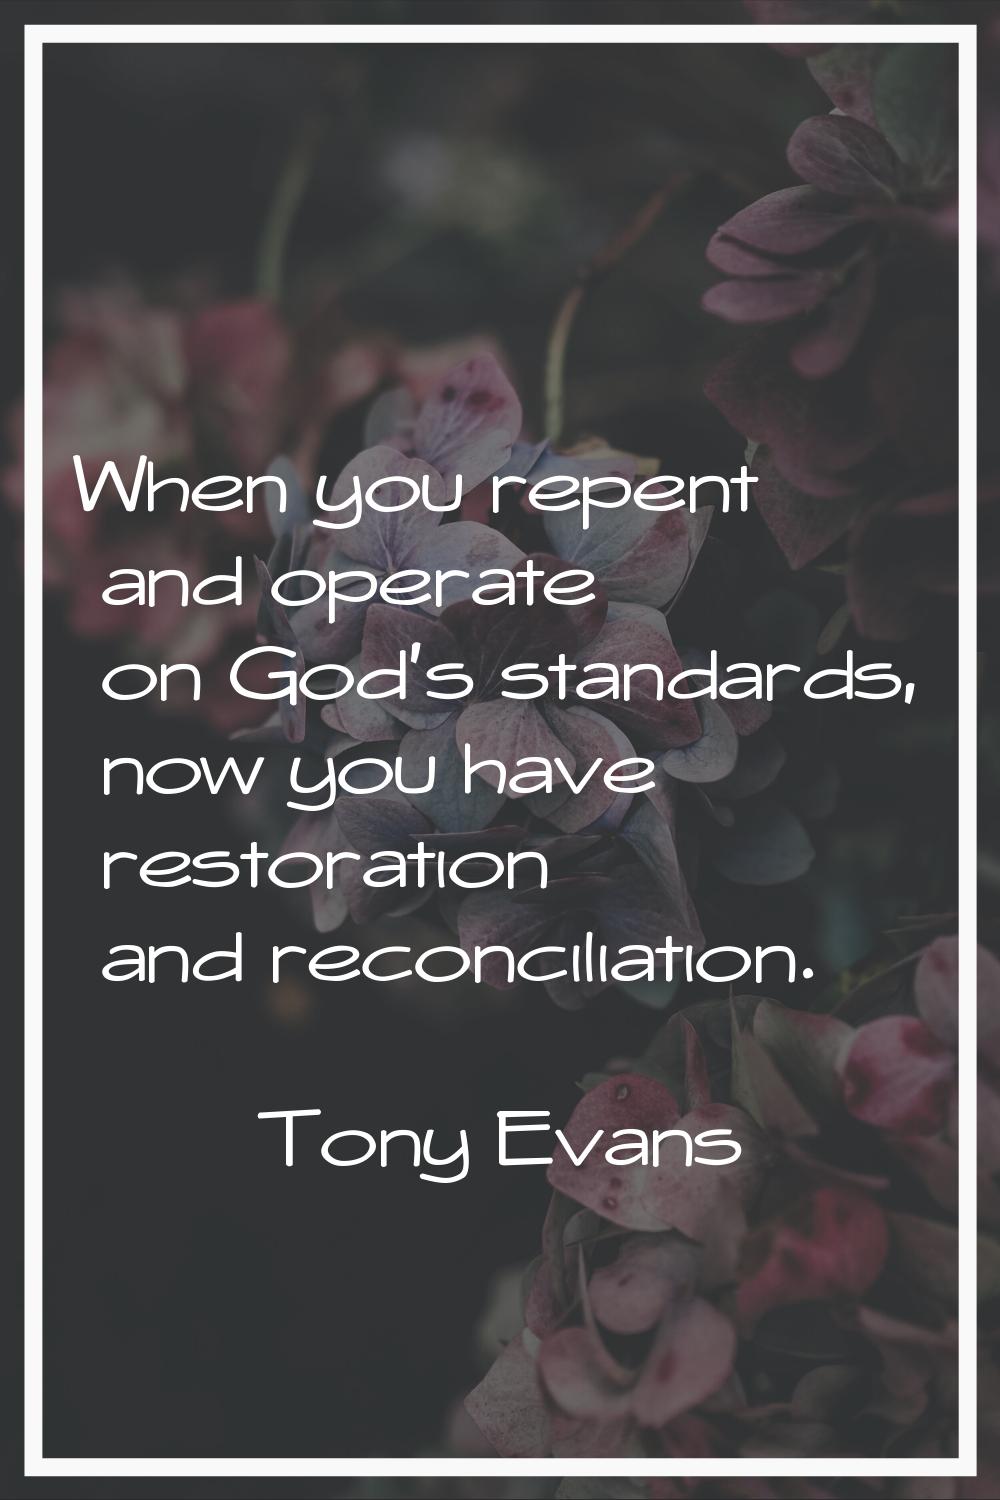 When you repent and operate on God's standards, now you have restoration and reconciliation.